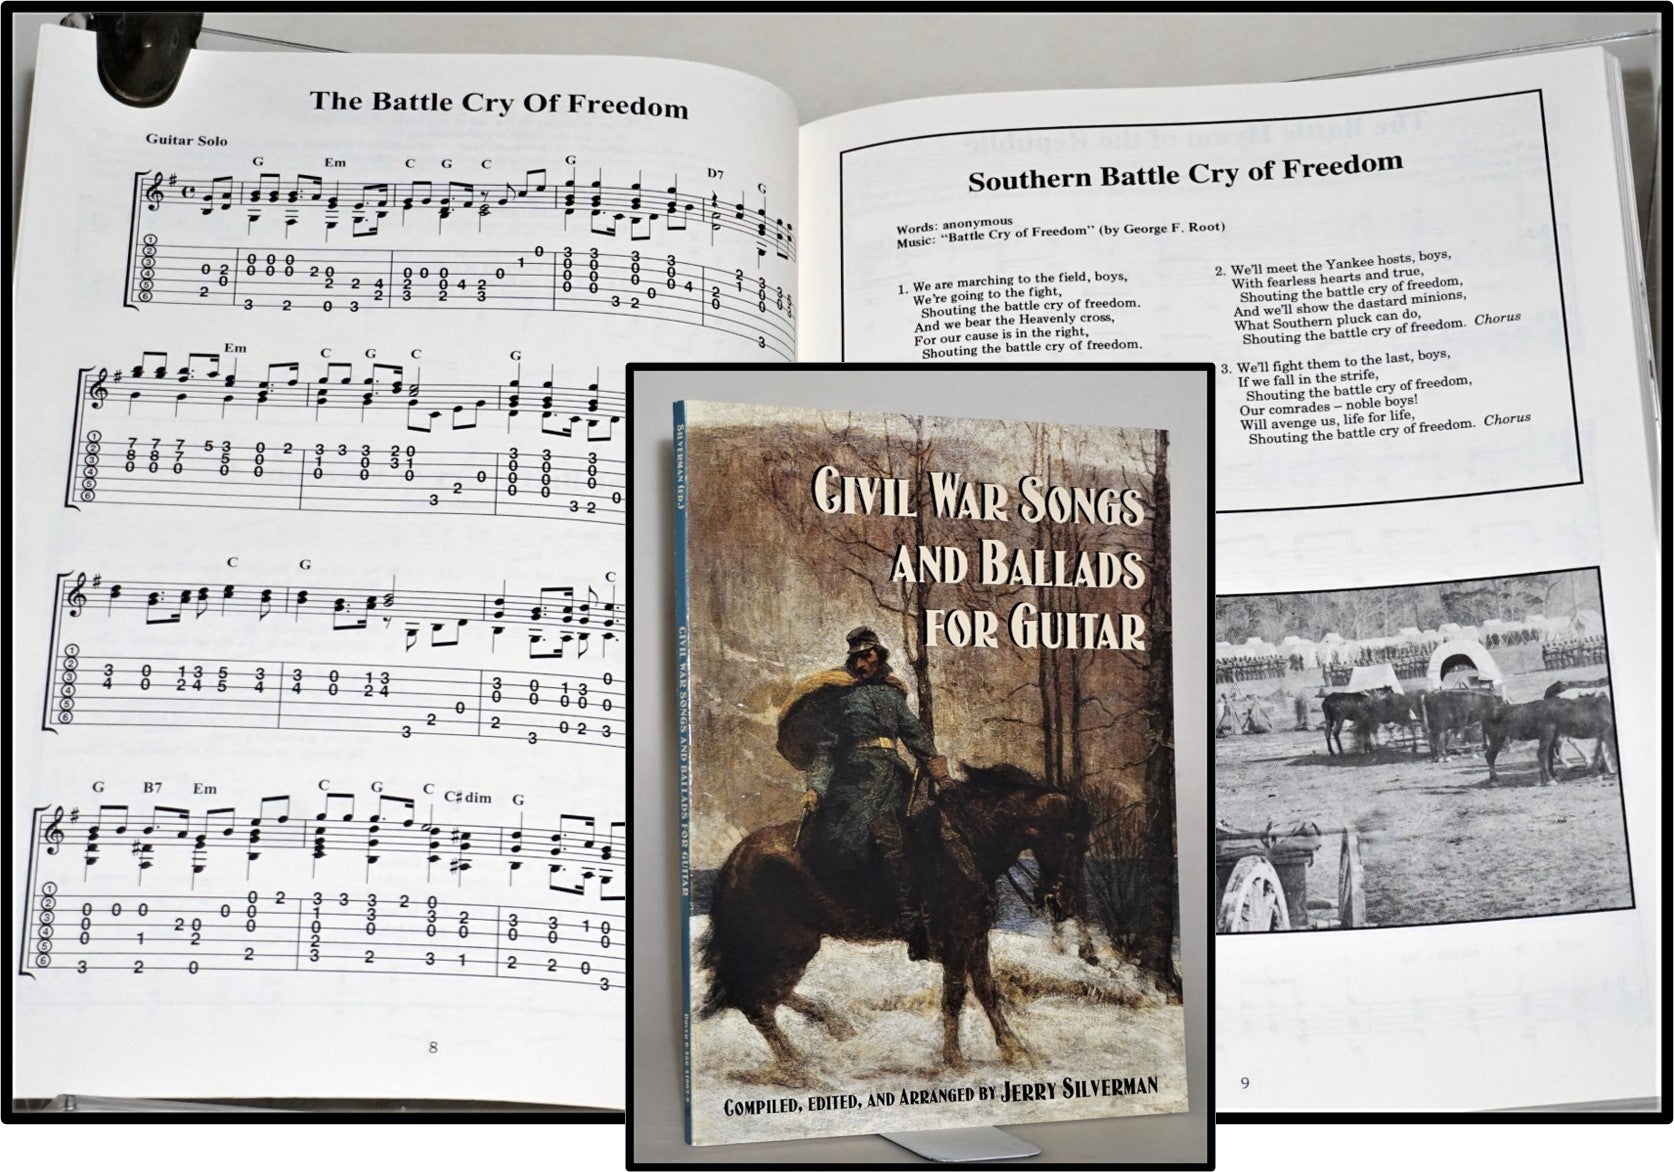 American war ballads and lyrics: a collection of the songs and